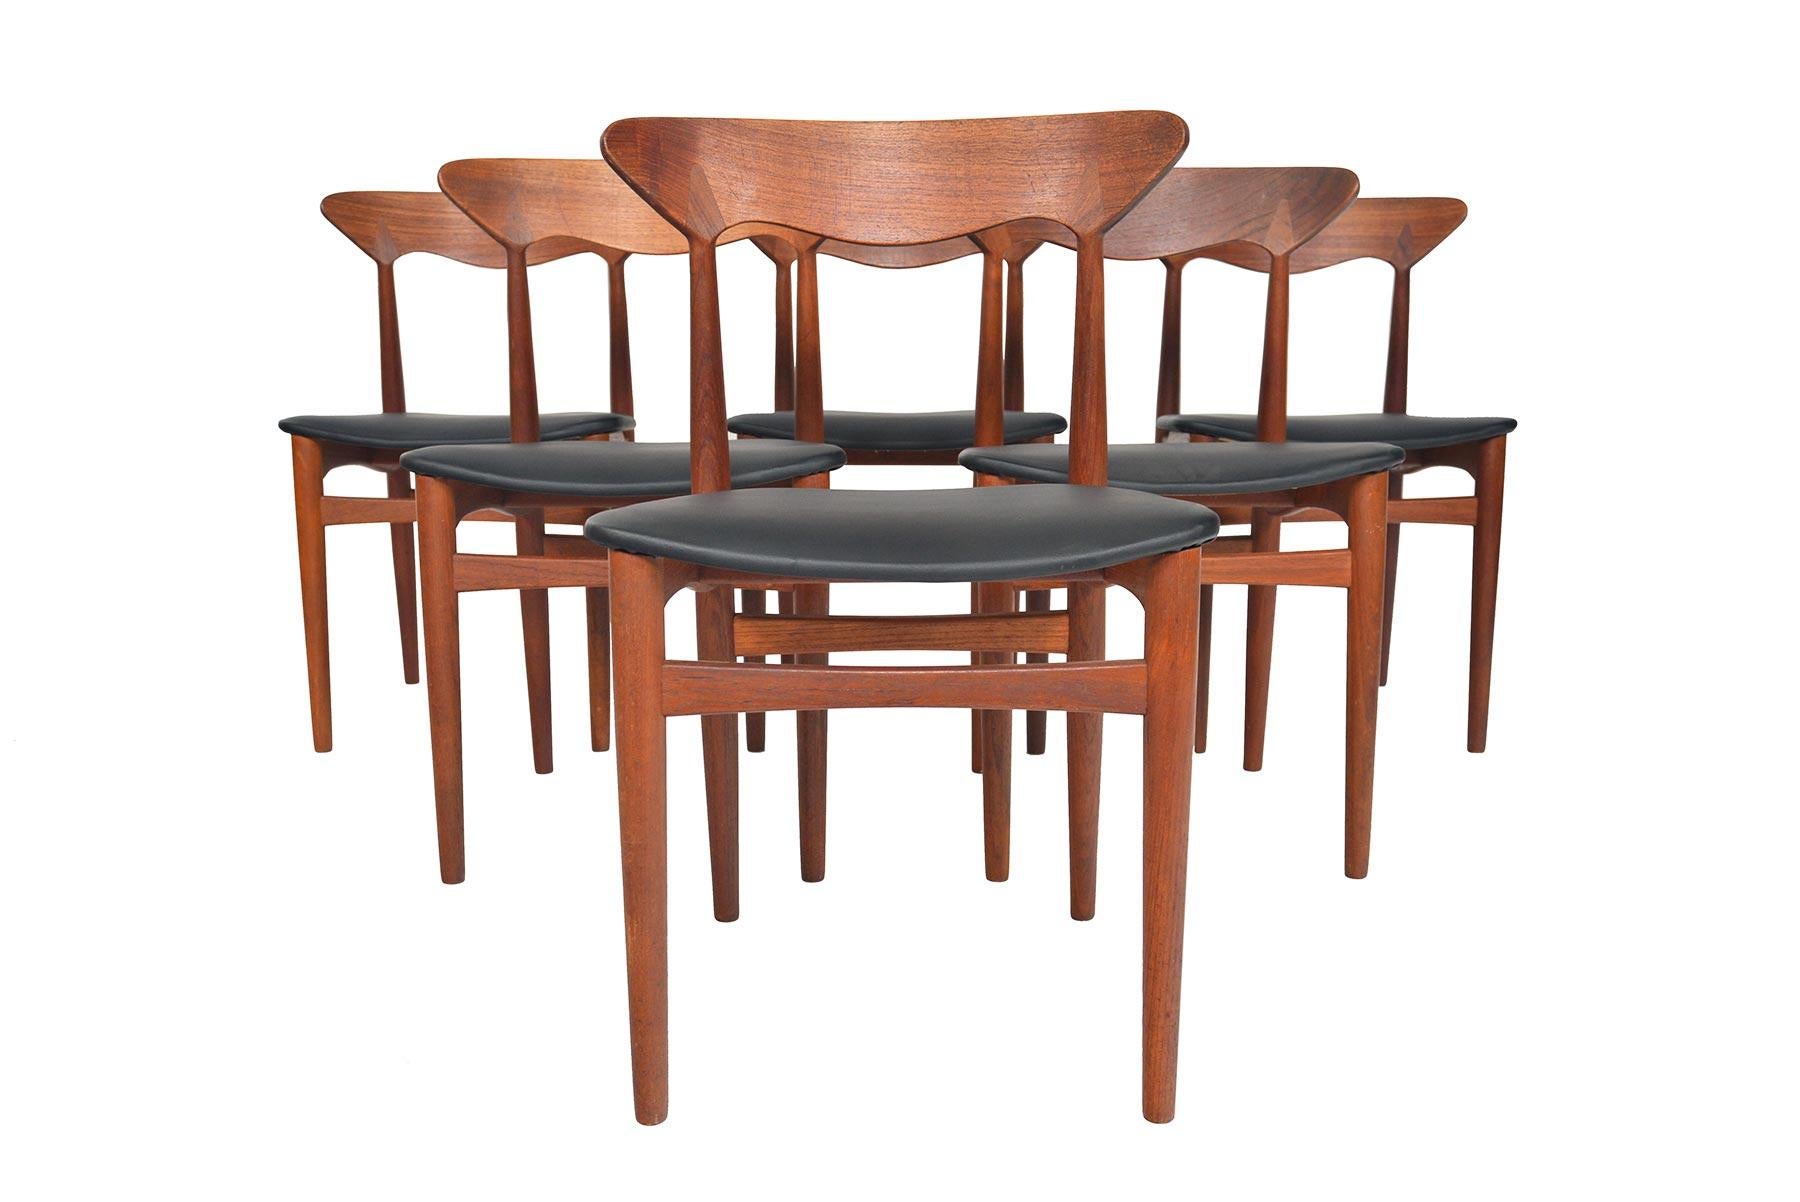 Origin: Denmark
Designer: Unknown
Manufacturer: Christian Linneberg
Era: 1950s
Dimensions: 20 wide x 17 deep x 30.5 tall 
Seat: 18 wide x 16 deep x 17 tall

Condition: Frames in good original condition with some cosmetic wear (will be